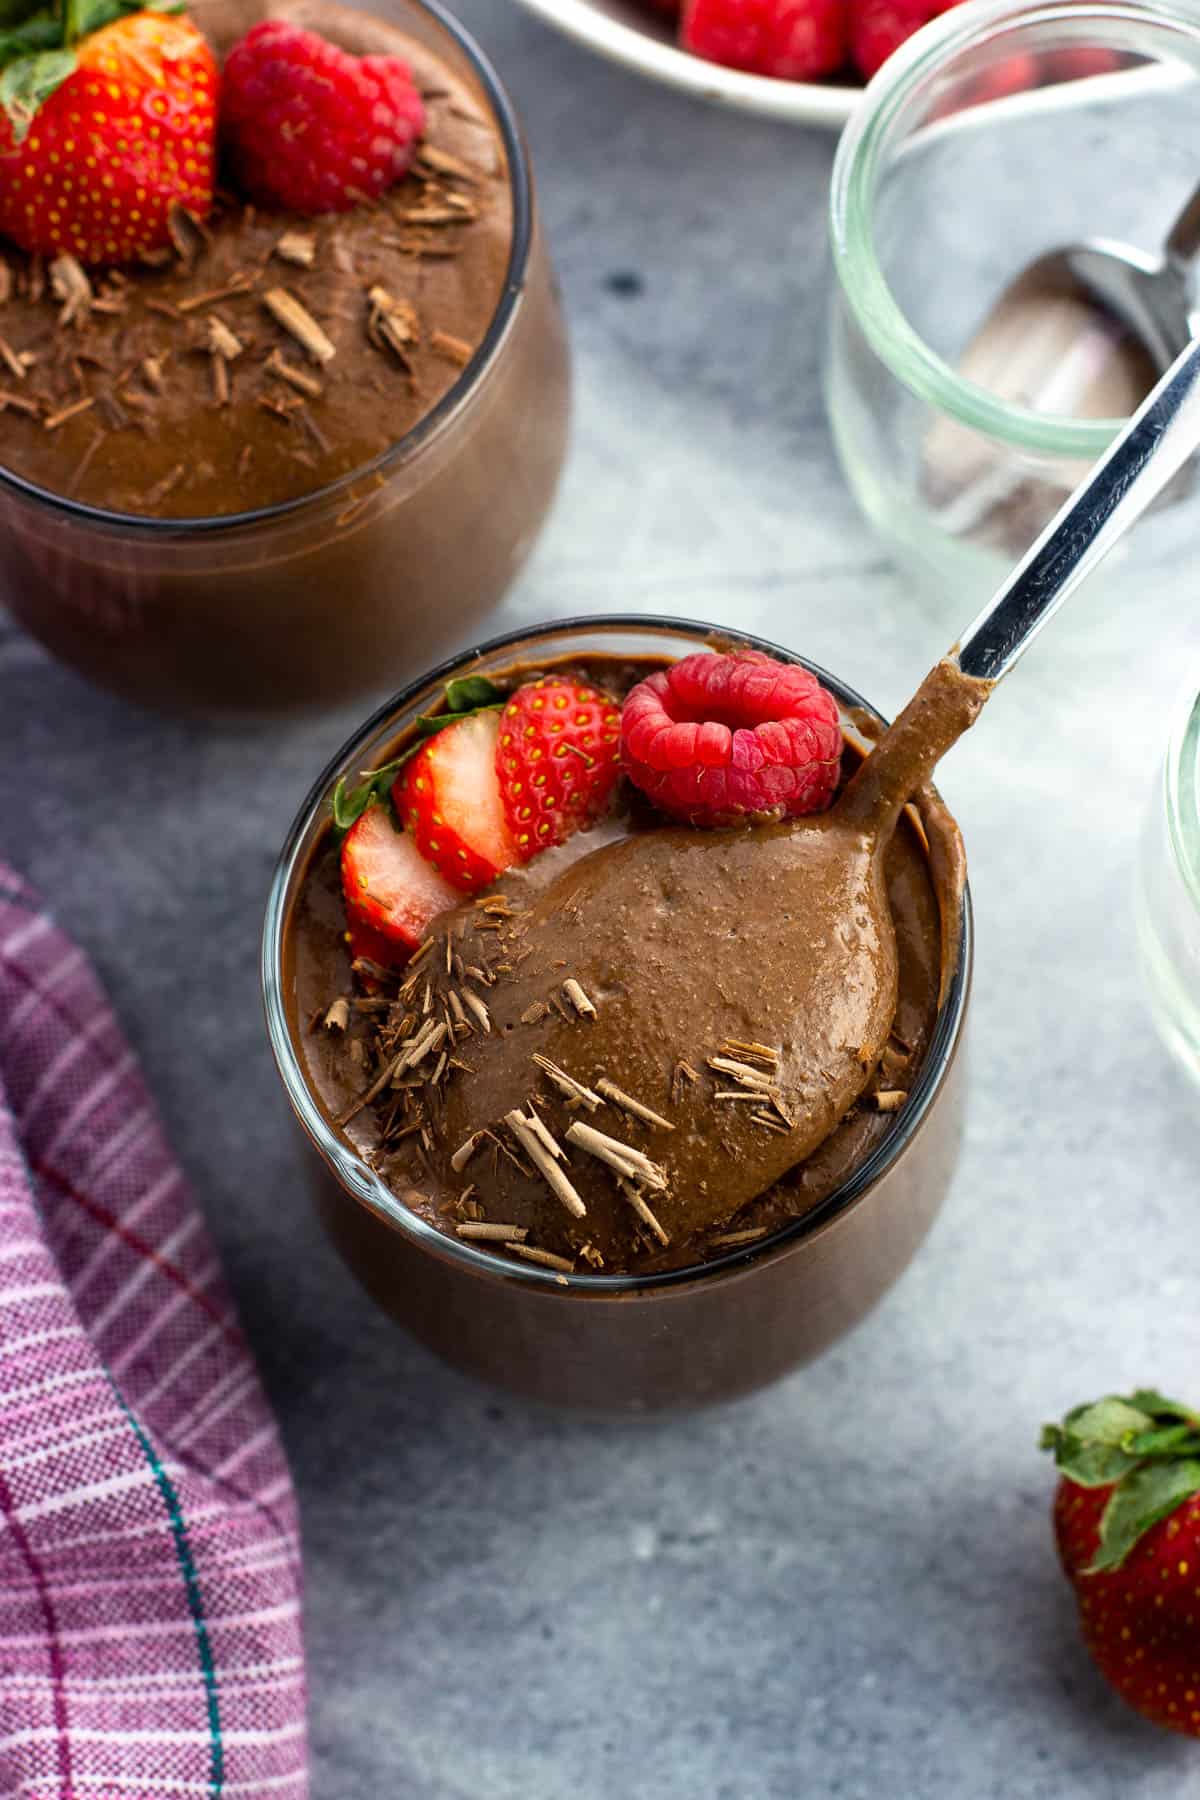 A spoon lifting out of a cup of blended chocolate chia pudding.